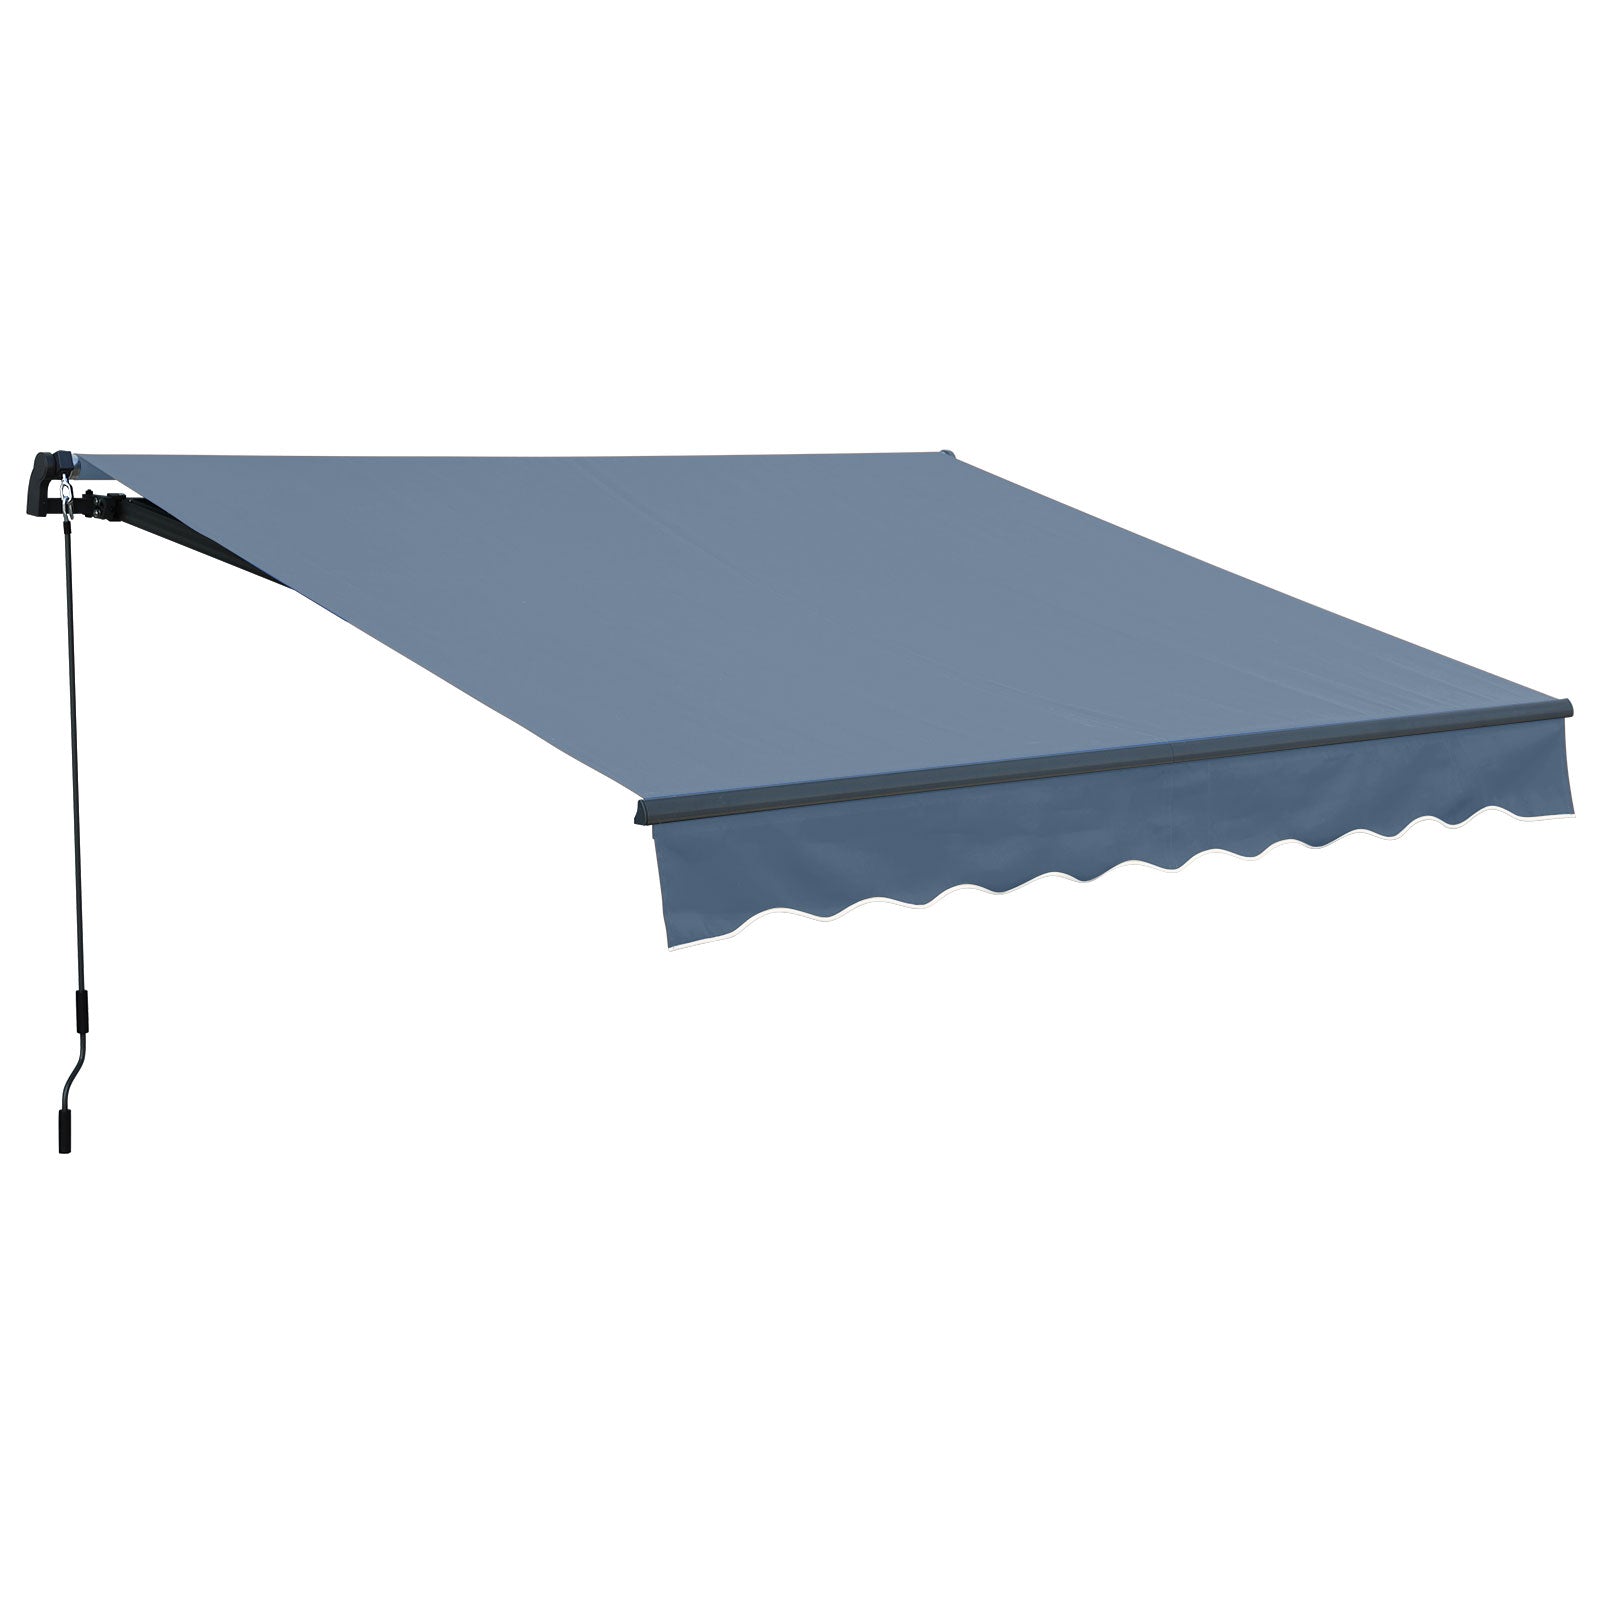 12'x  8' x 5' Retractable Window Awning Sunshade Shelter,Polyester Fabric,with Brackets and Two Wall Bases  Aoodor Gray  